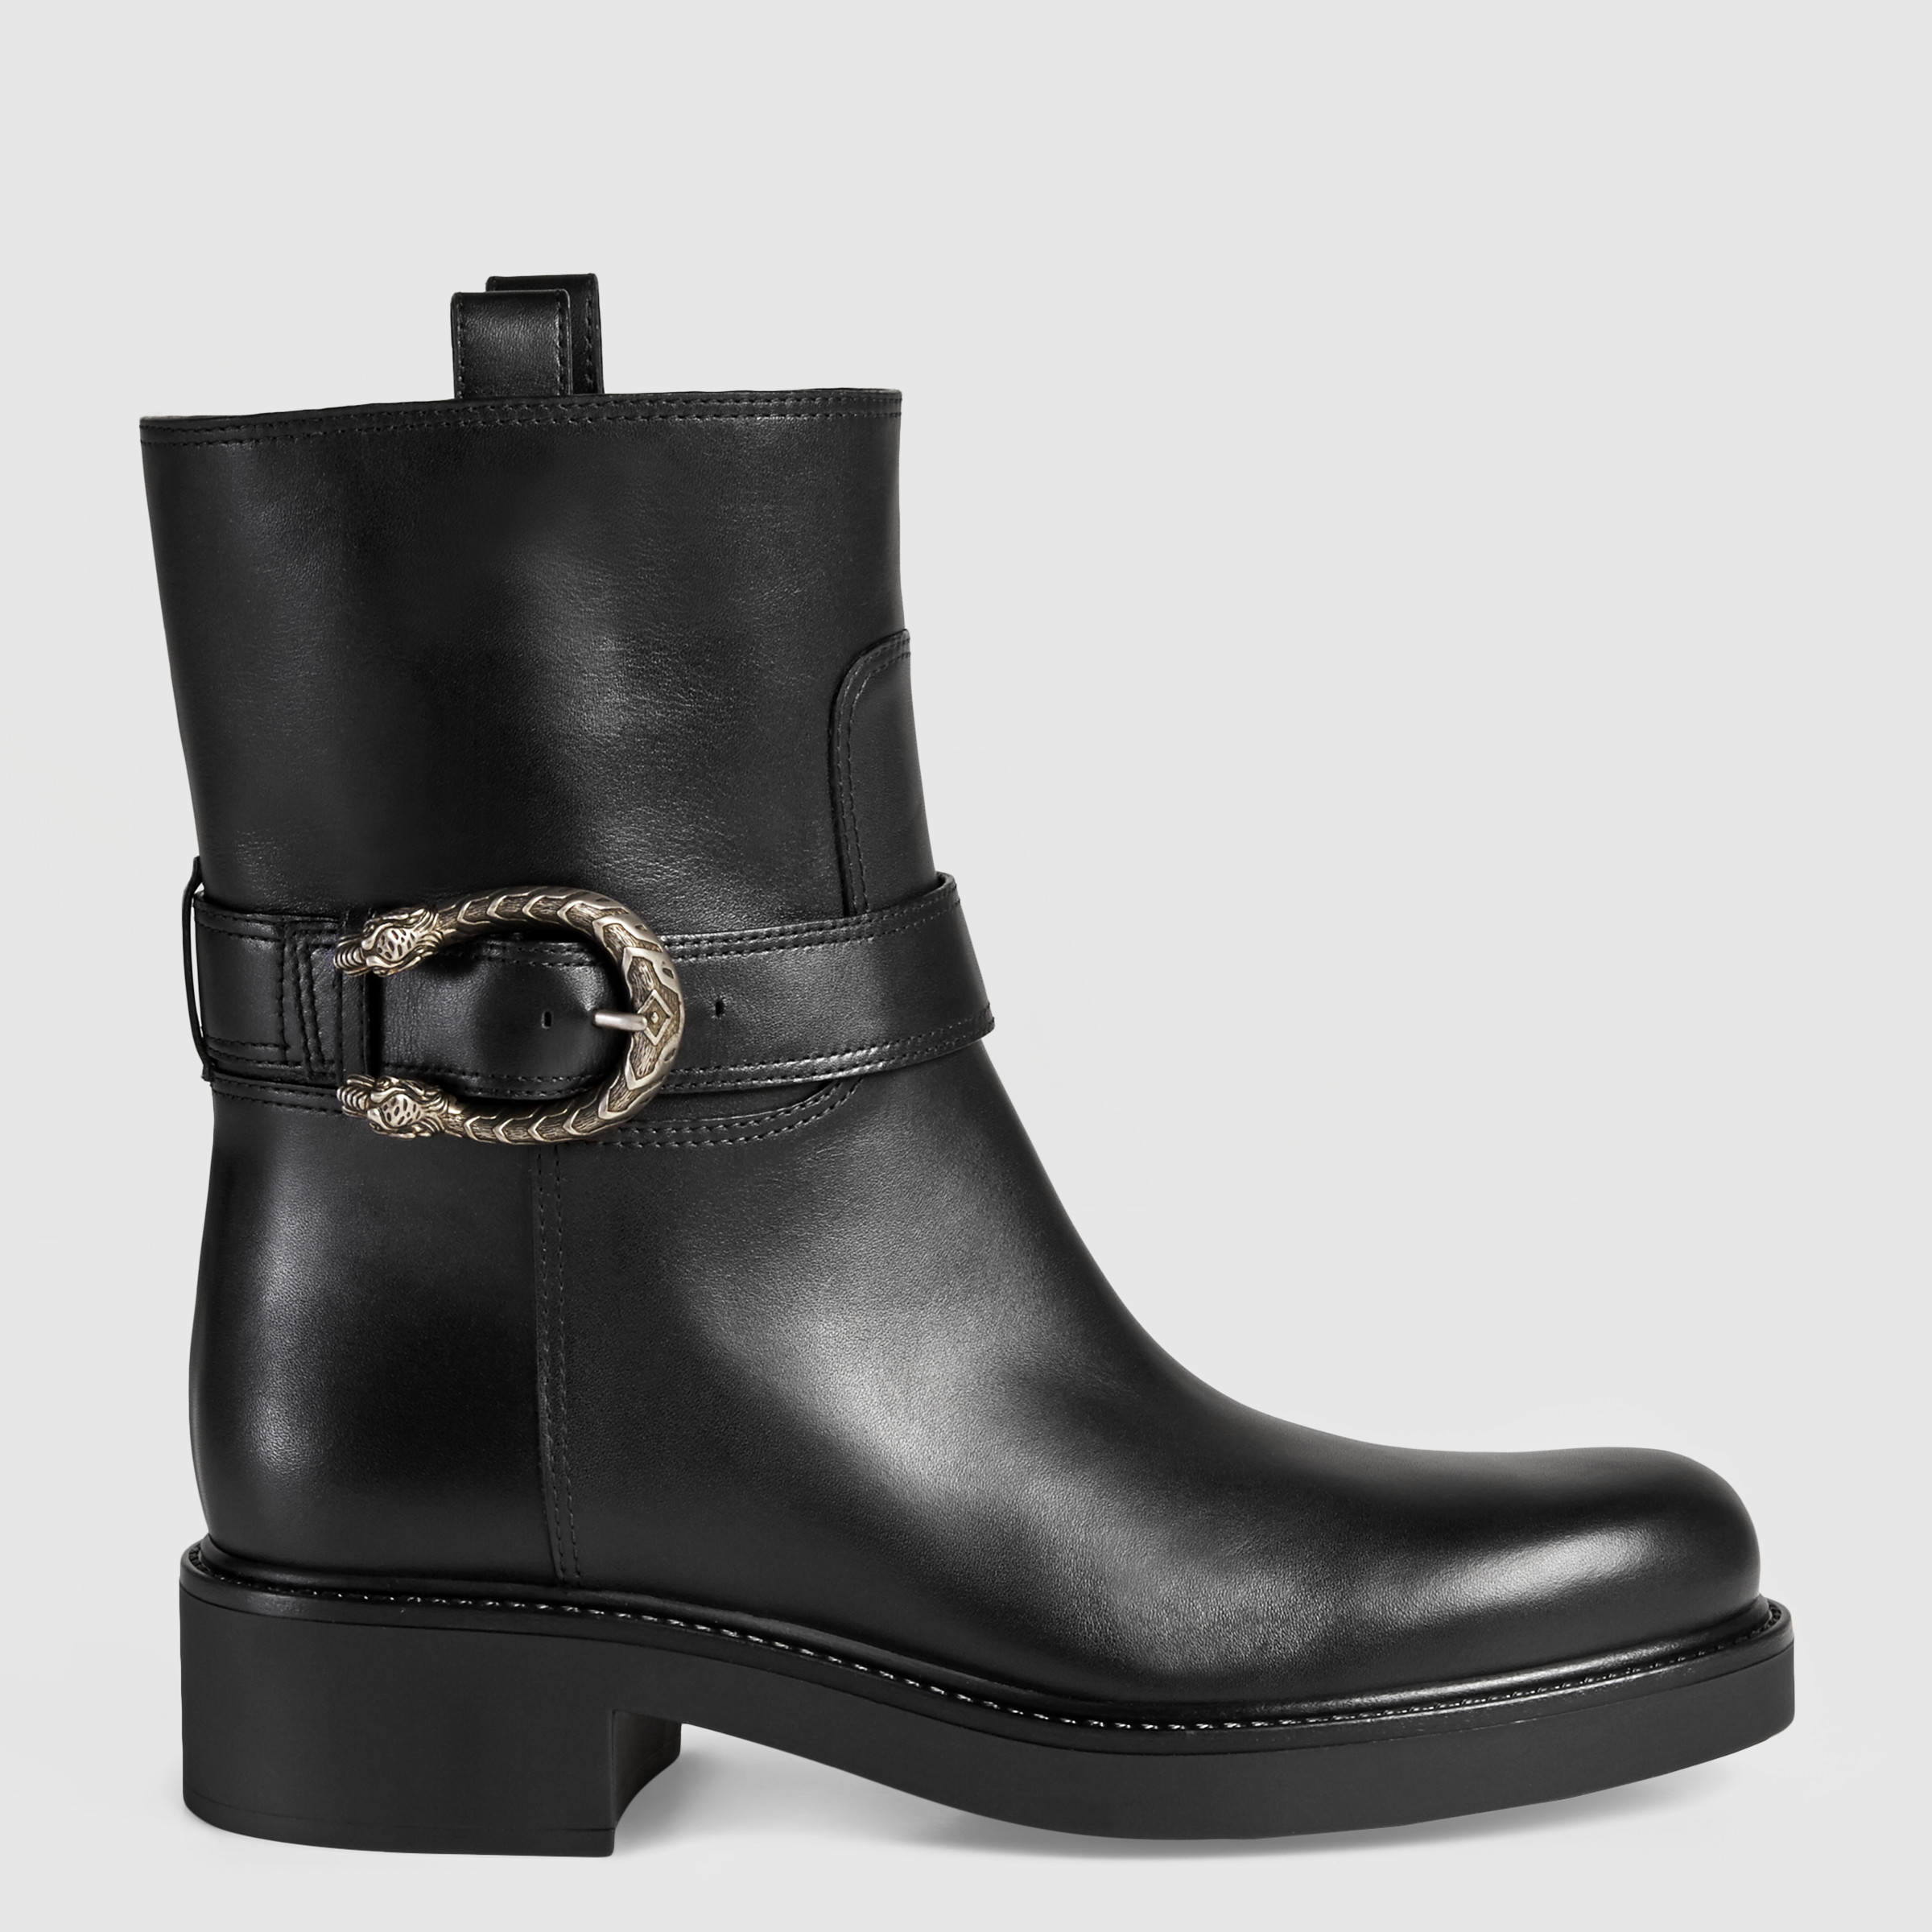 Lyst - Gucci Leather Ankle Boot in Black